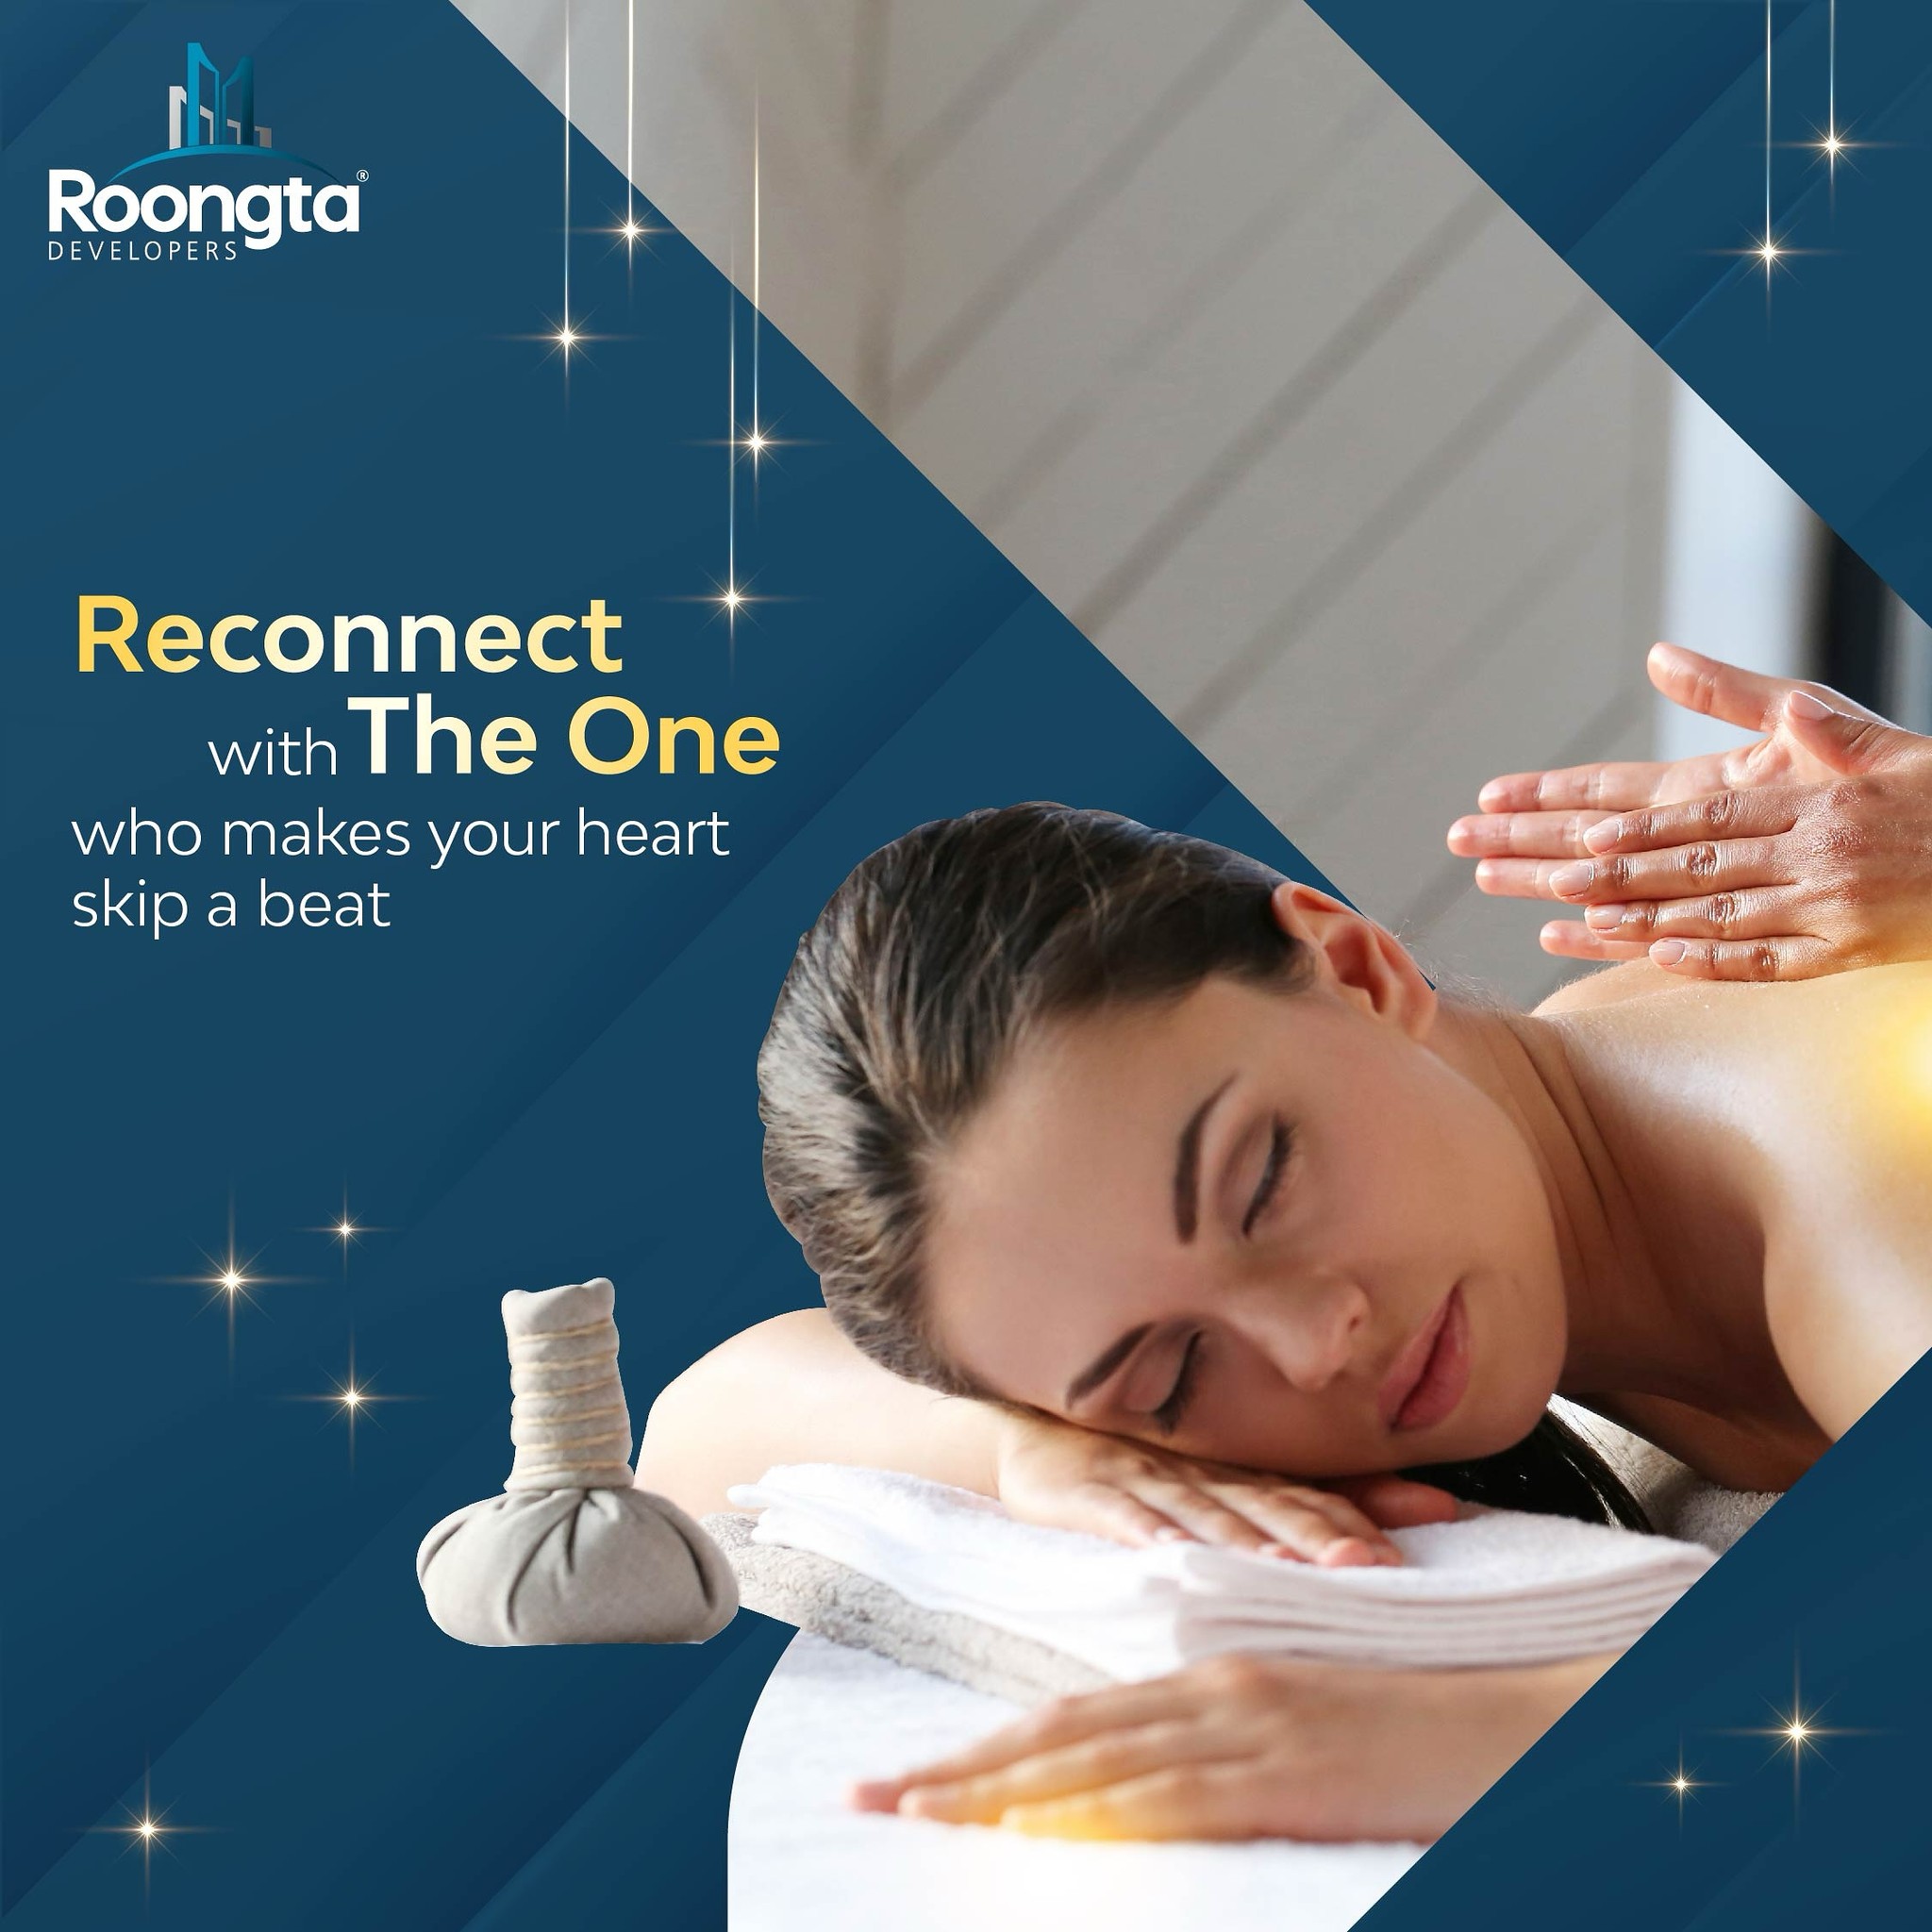 Roongta Reconnect